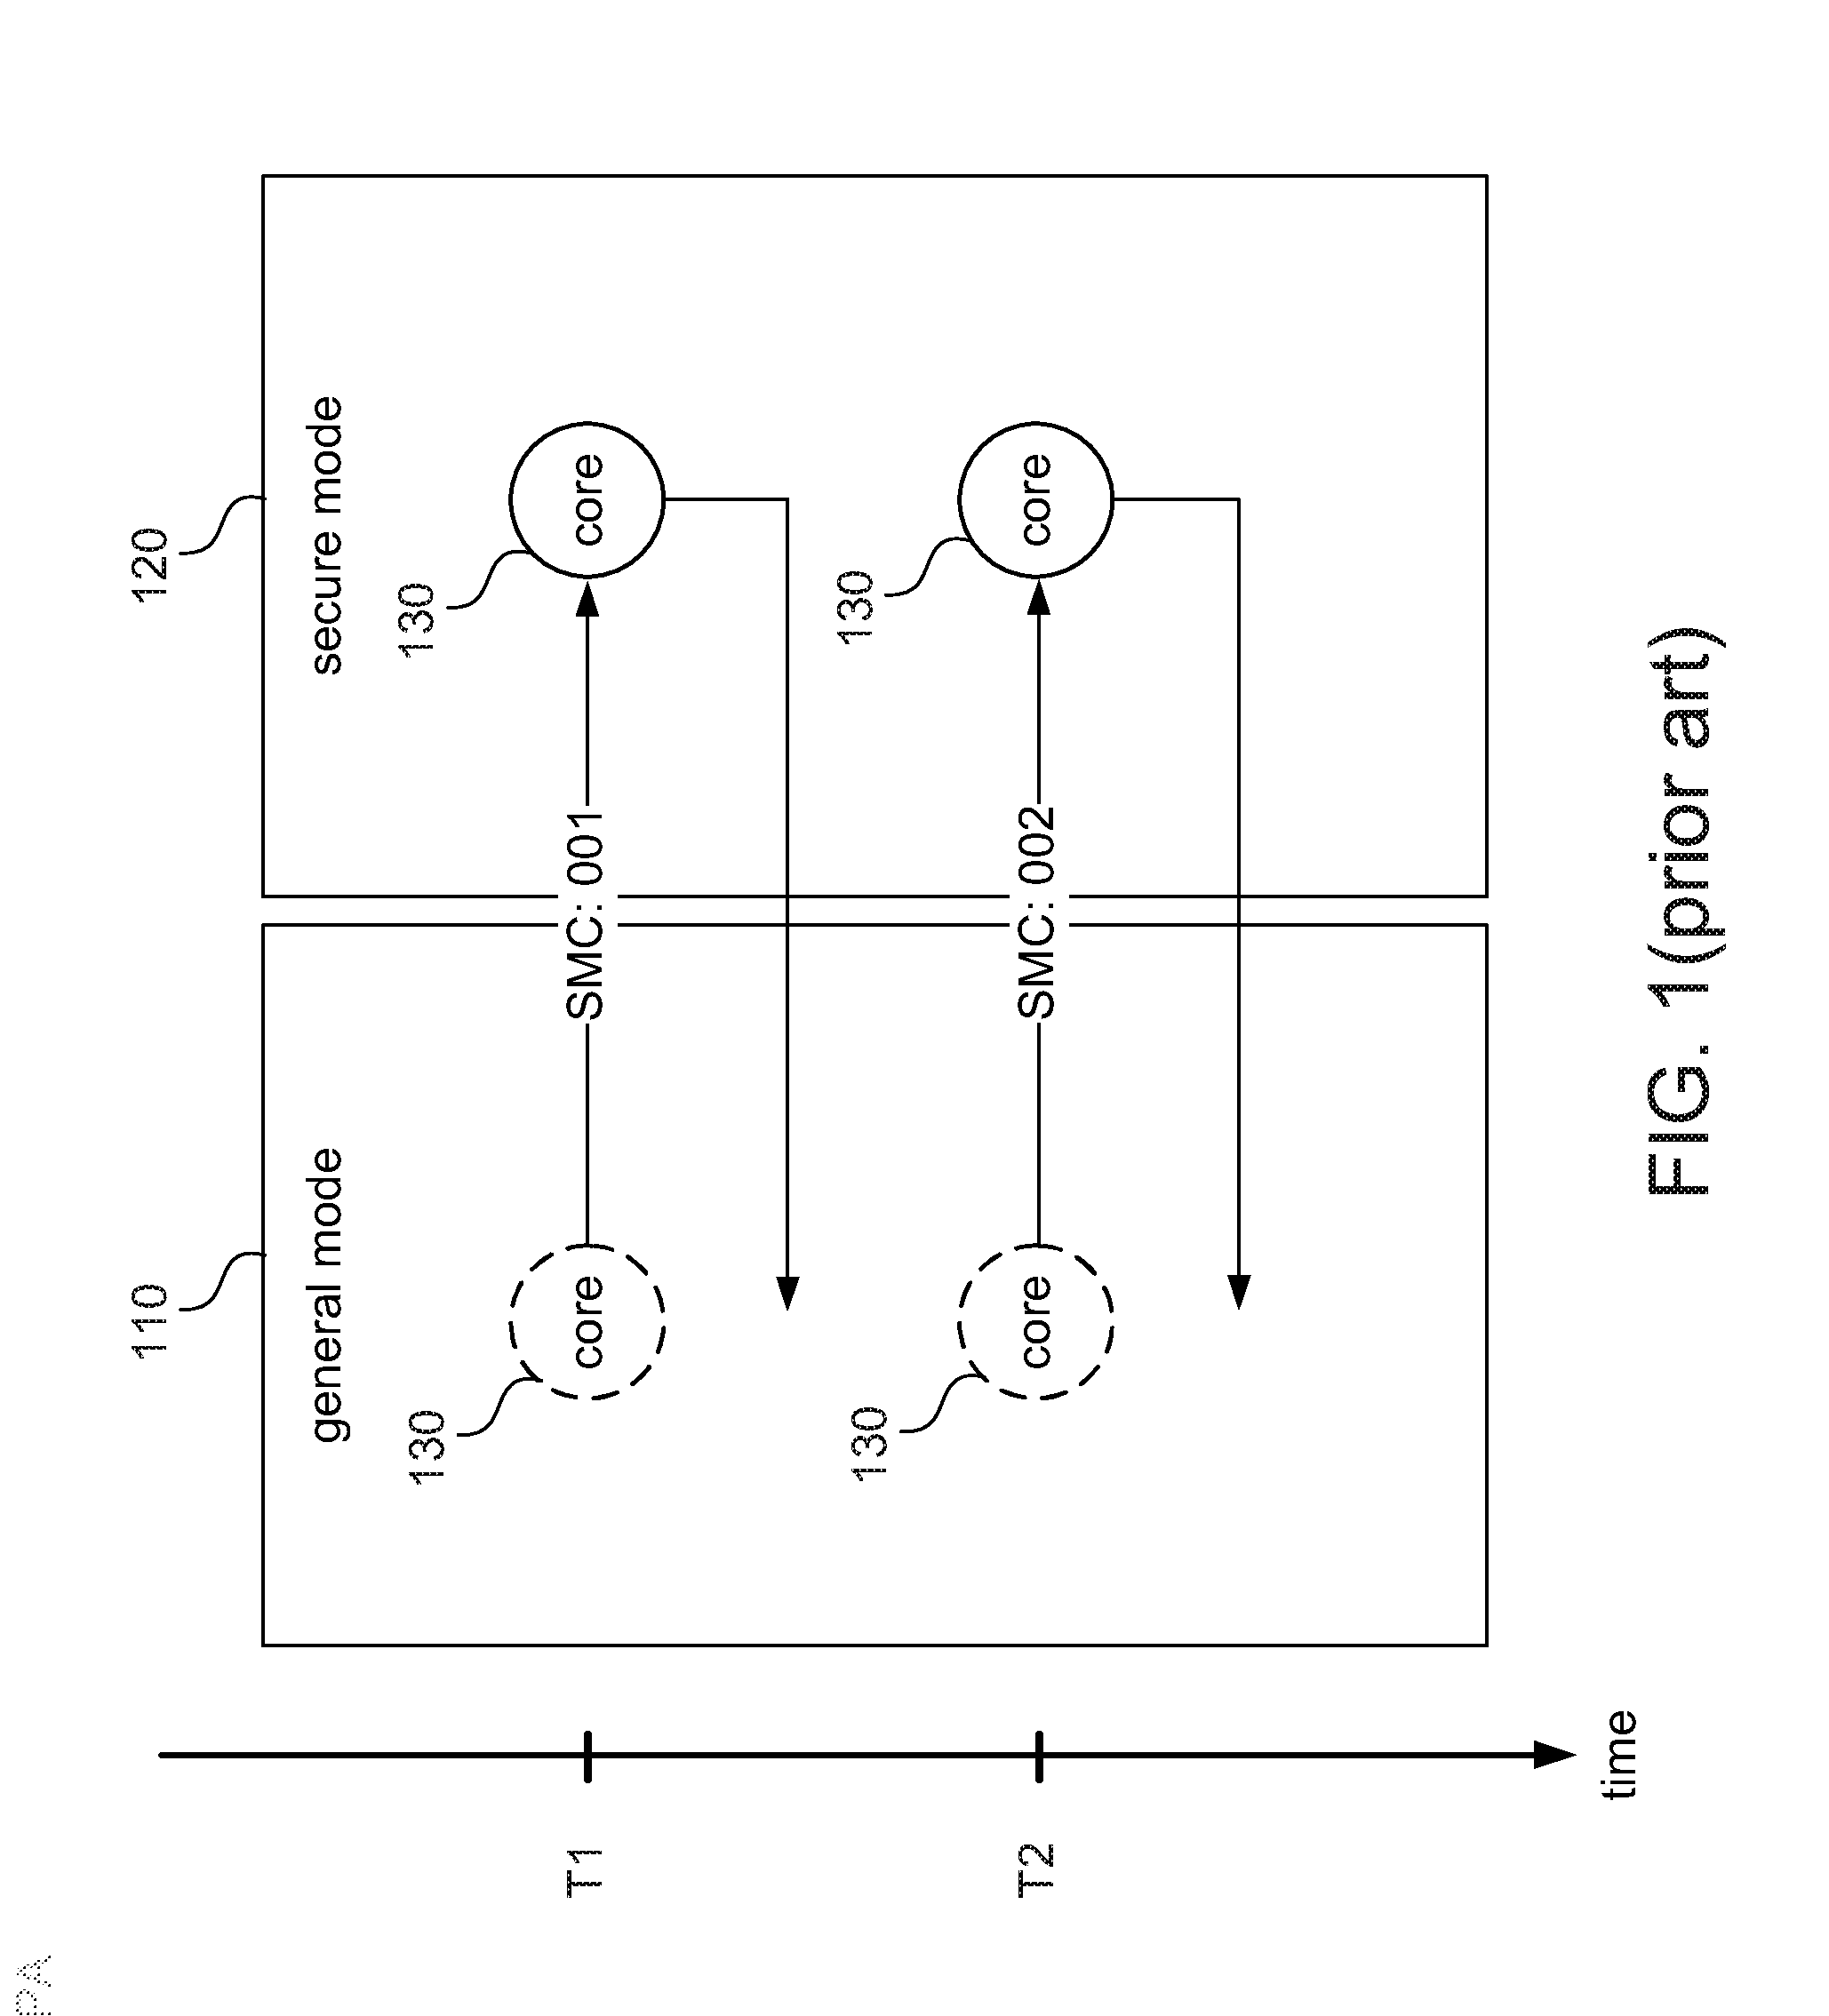 Computing device and method of processing secure services for computing device